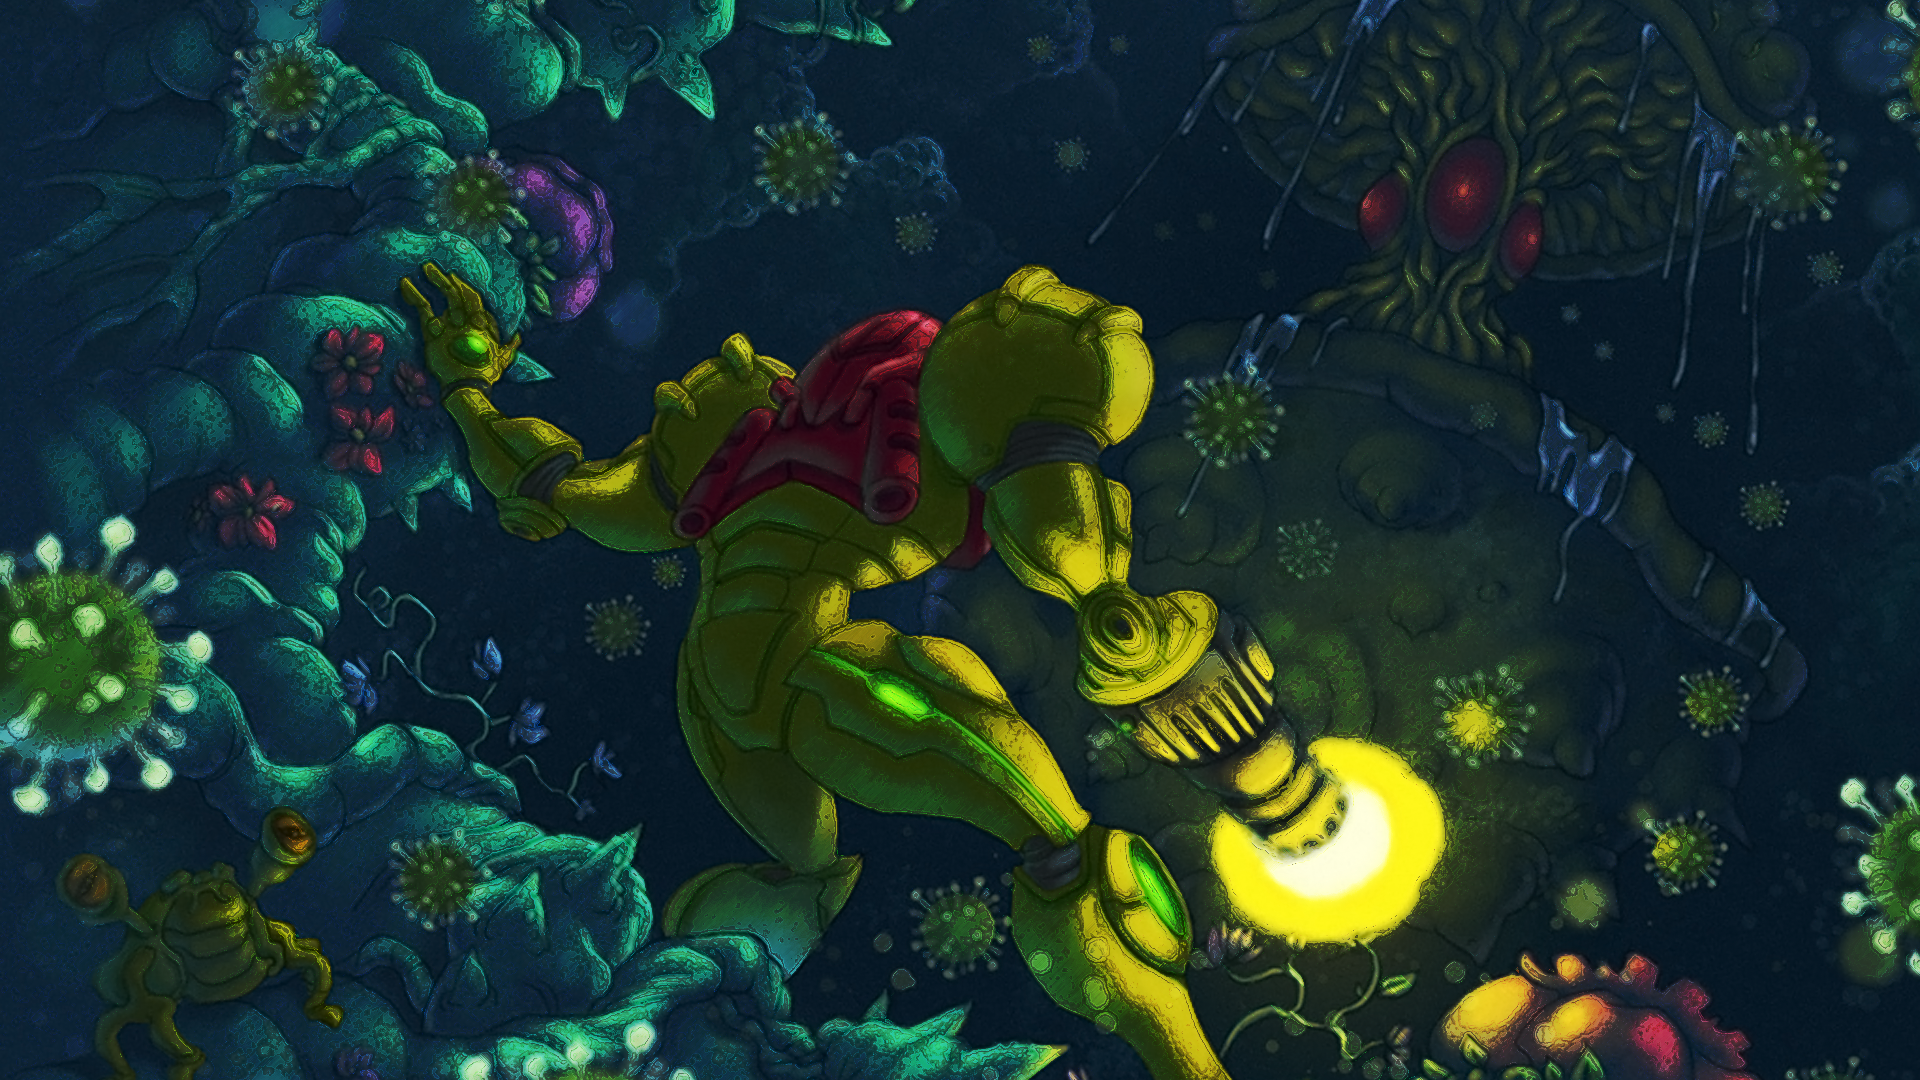 Sly on Twitter New iPhone wallpaper is all kinds of awesome Metroid  metroid35th MetroidDread httpstcorAYChtLnTl  Twitter